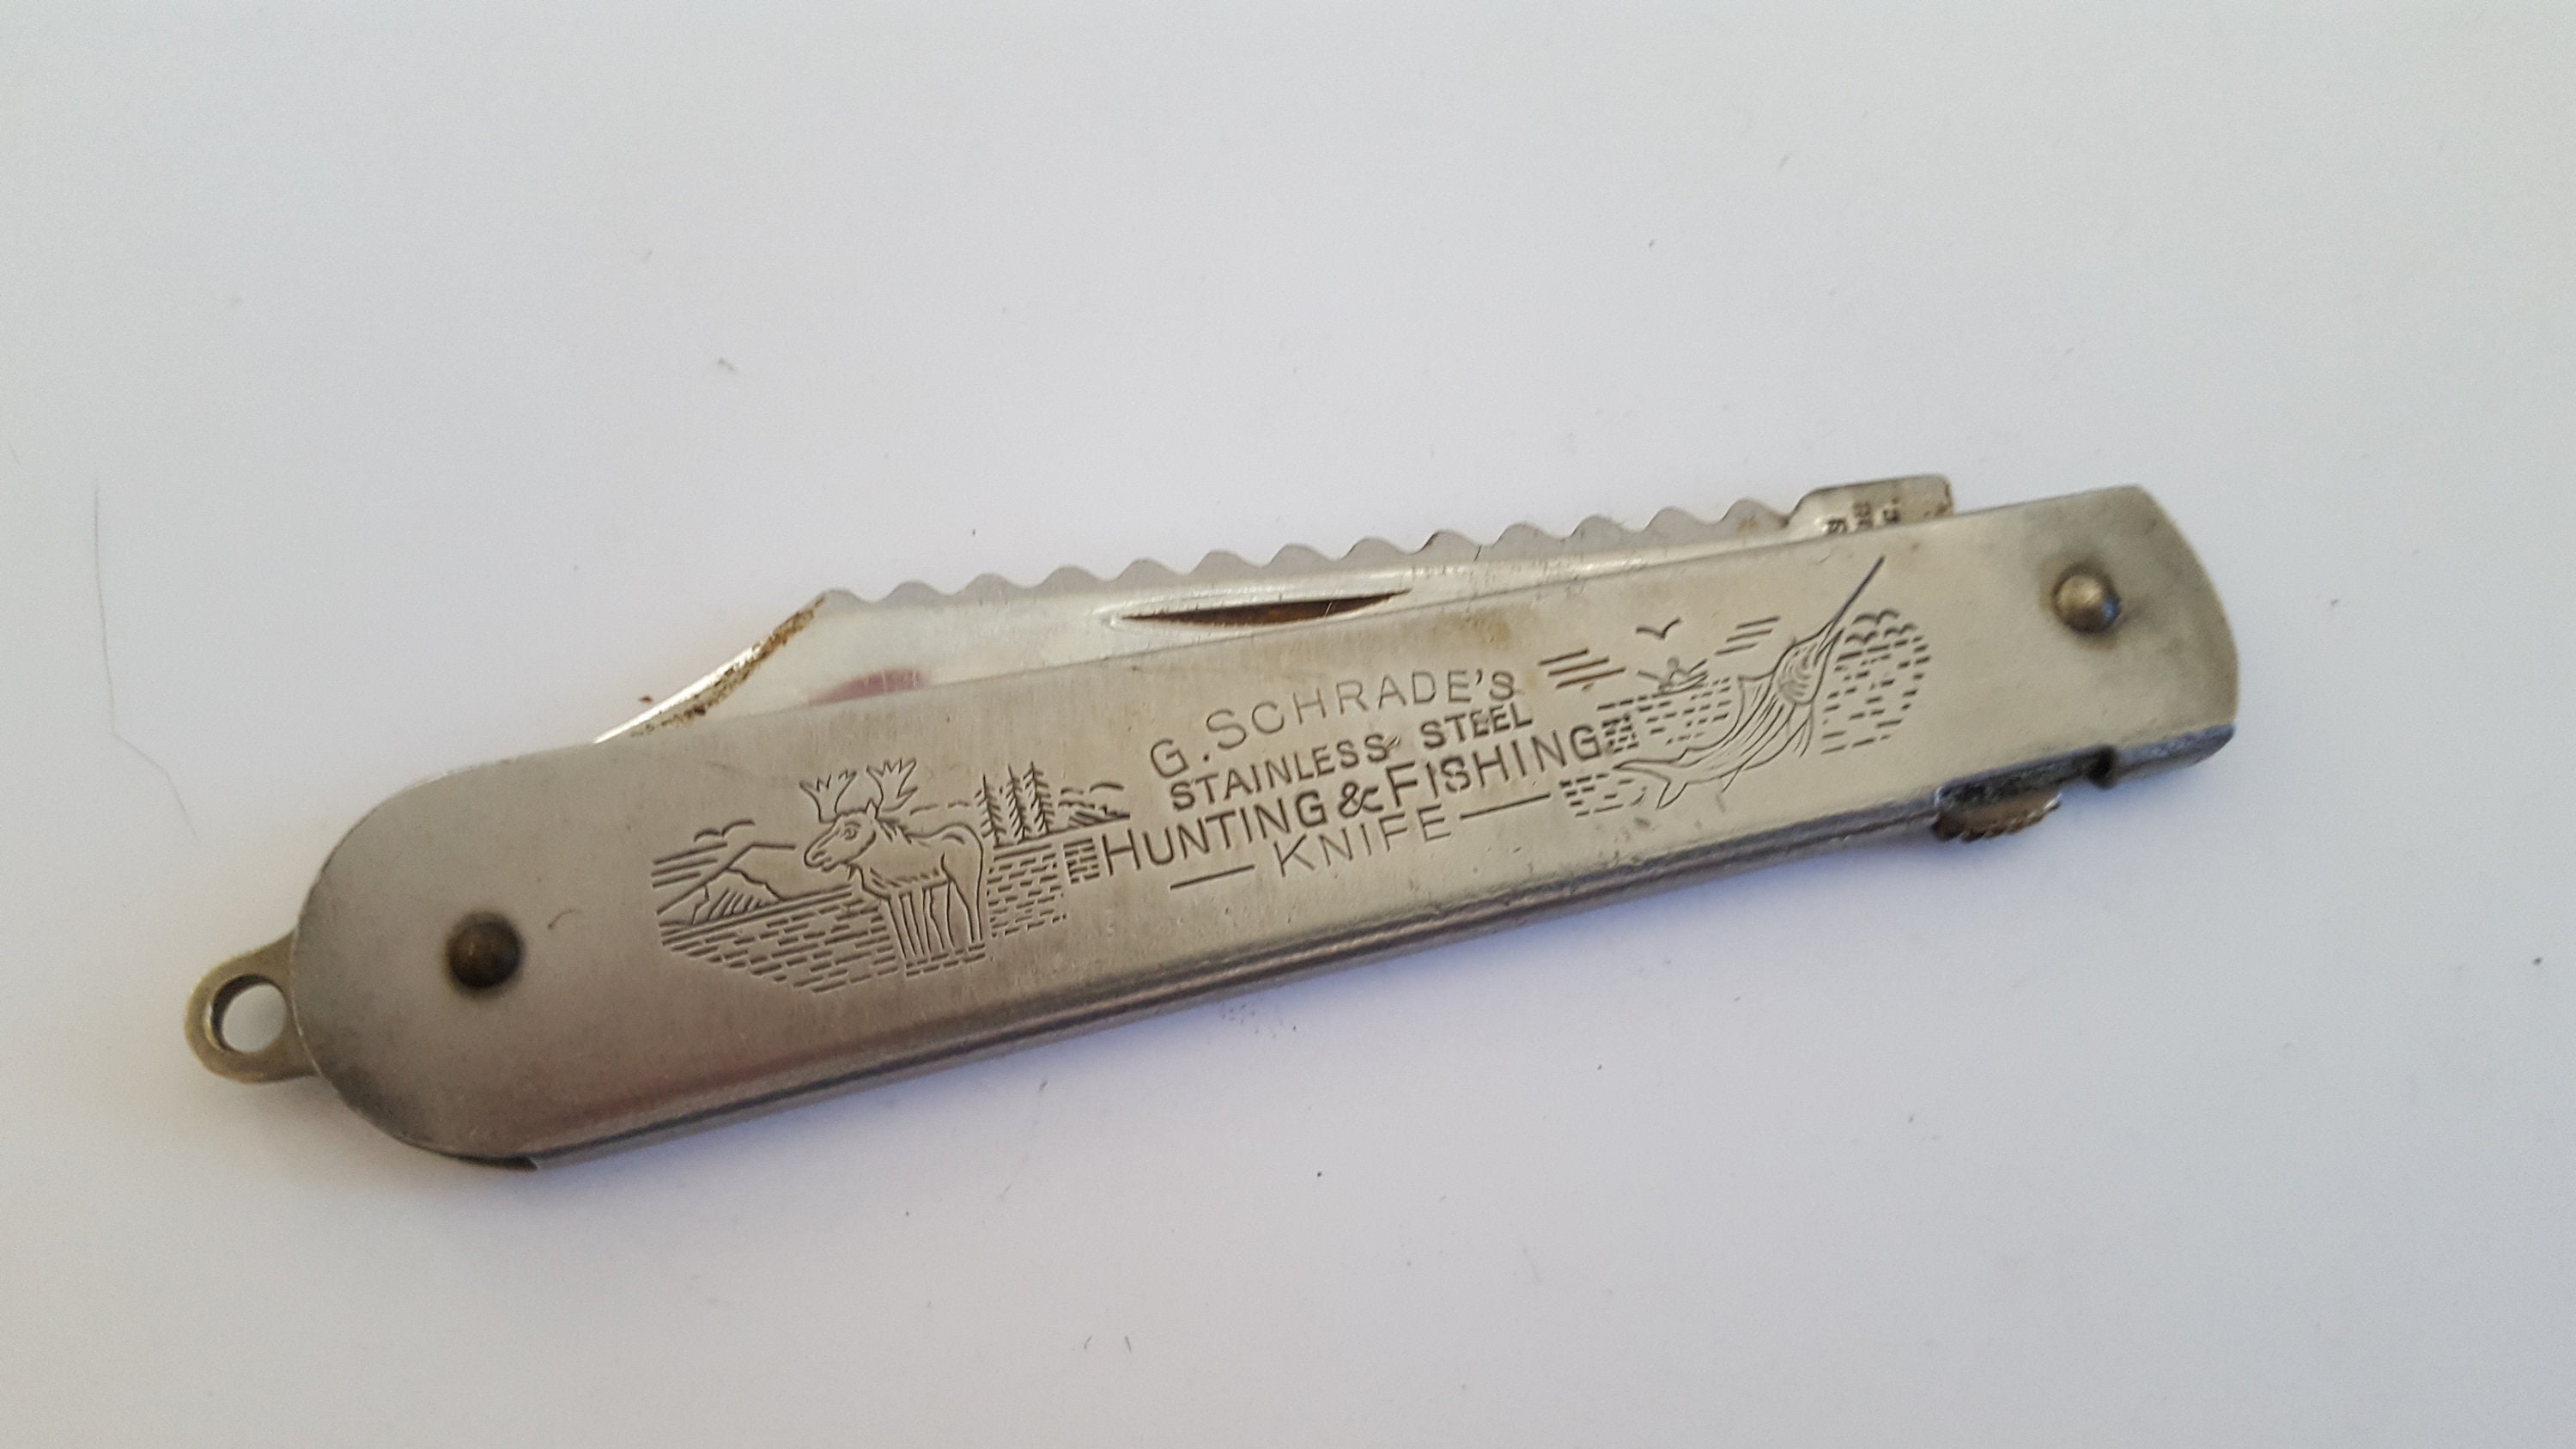 Vintage G. Schrade Stainless Steel Hunting and Fishing Knife, 1925